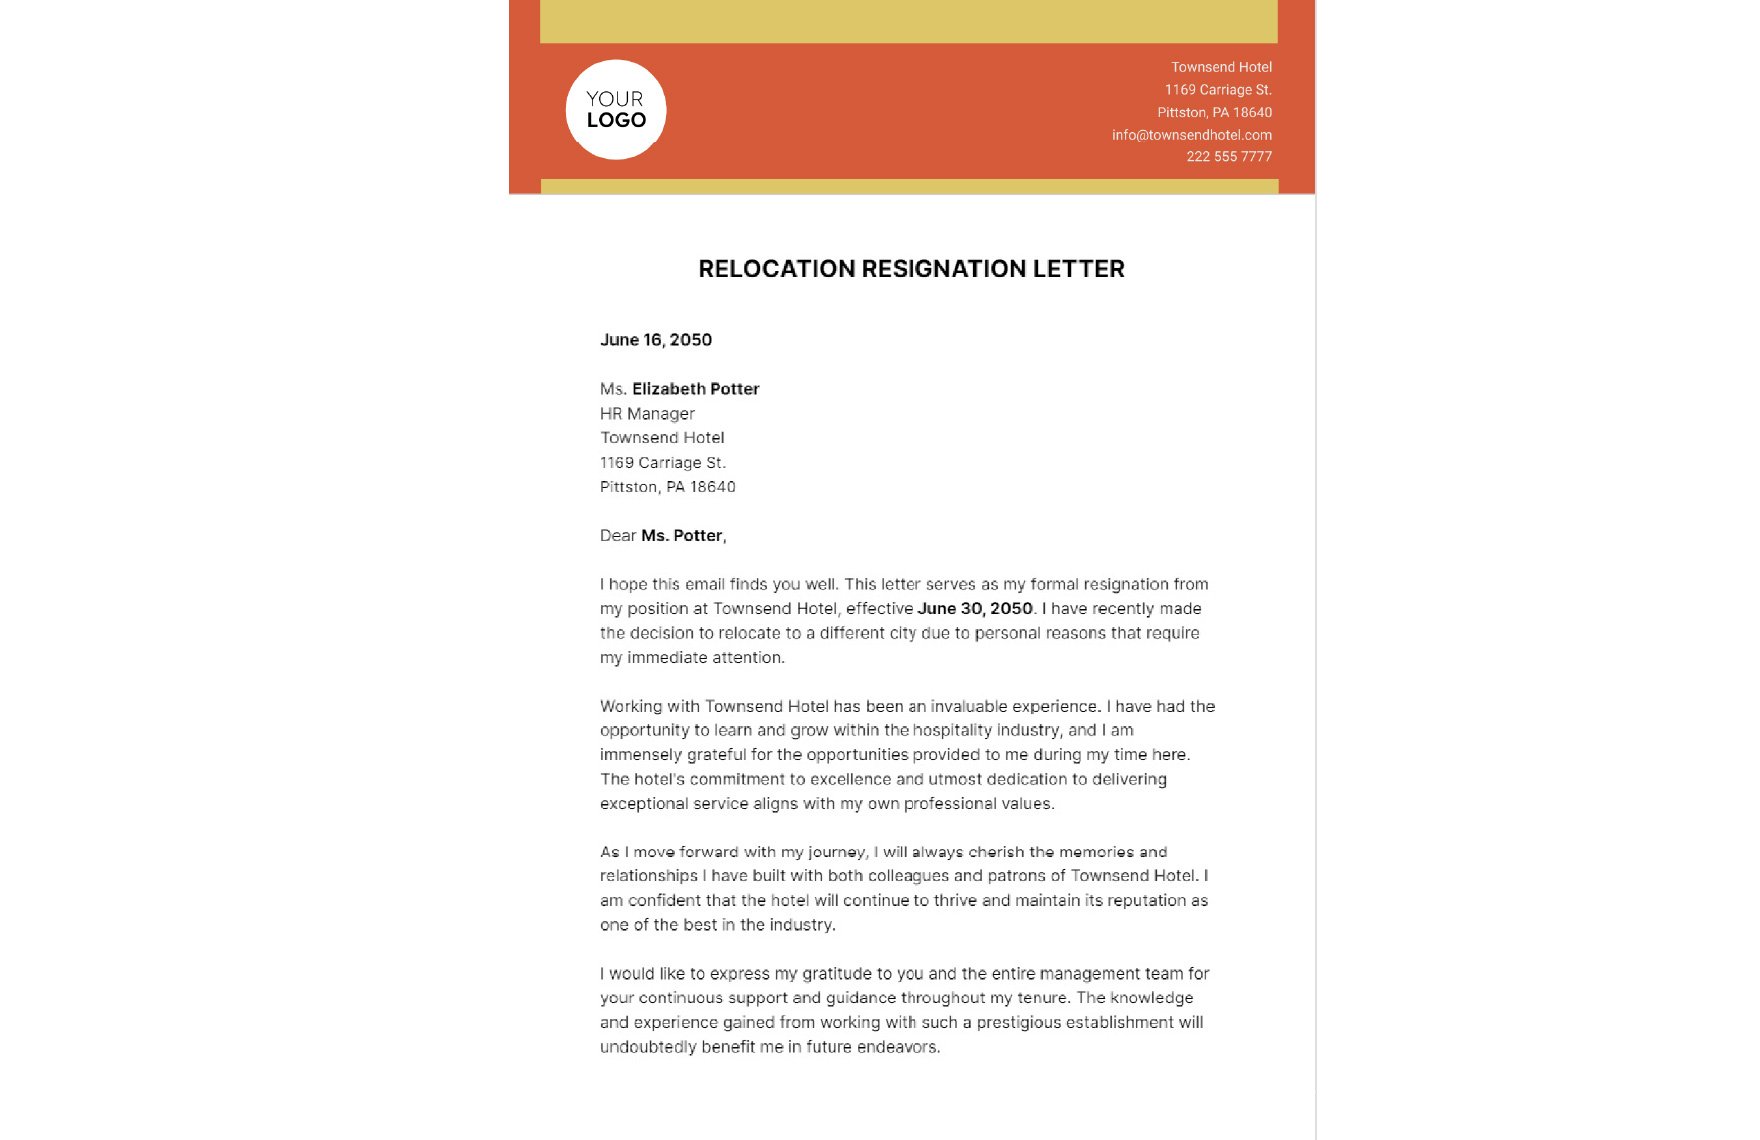 Relocation Resignation Letter  Template